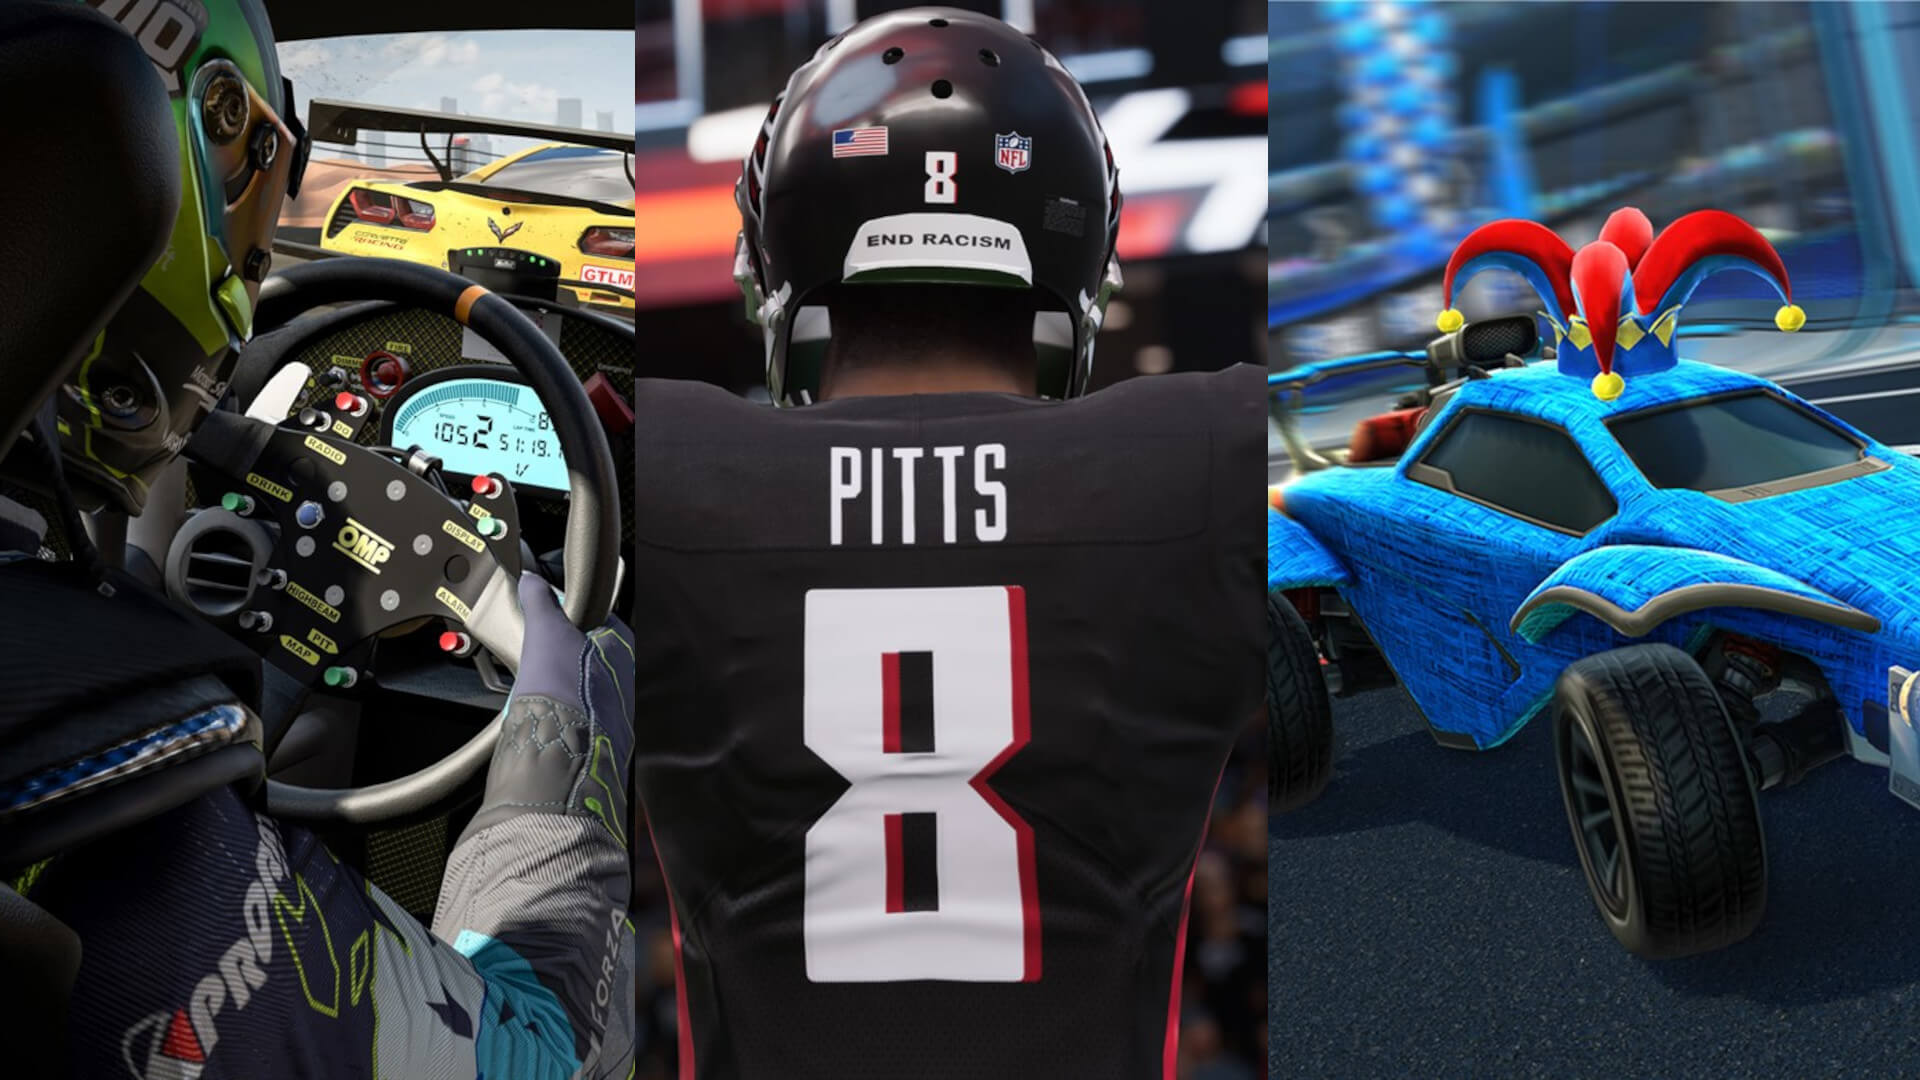 Forza Motorsport 7, Madden NFL 22, and Rocket League, the games present at the Gaming for Inclusion tournament